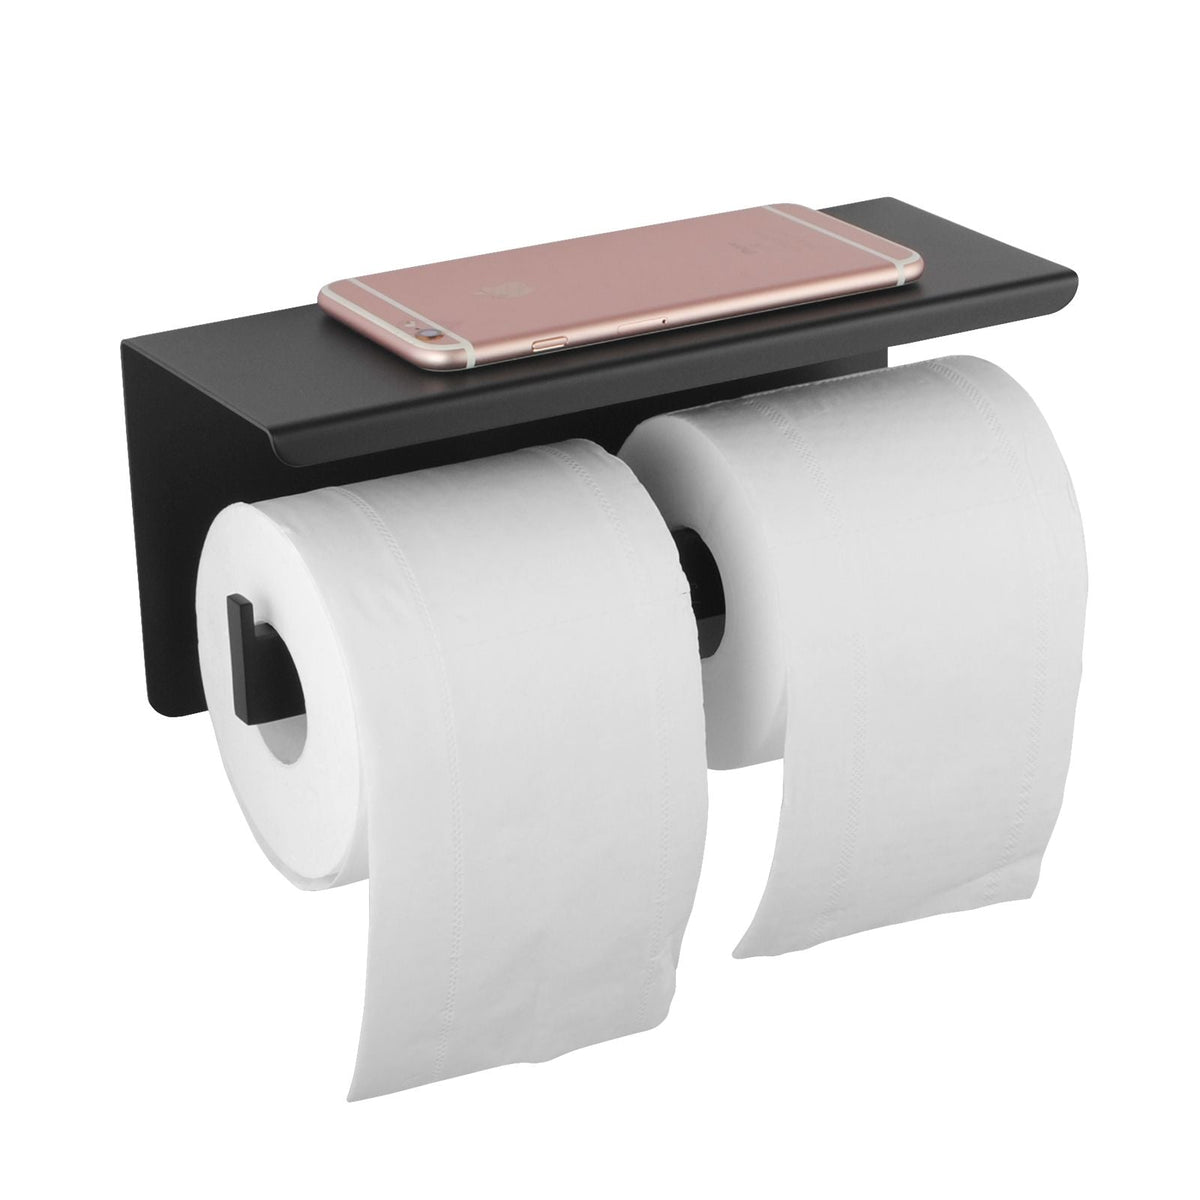 BLAZE Black Double Toilet Paper Holder with Cover